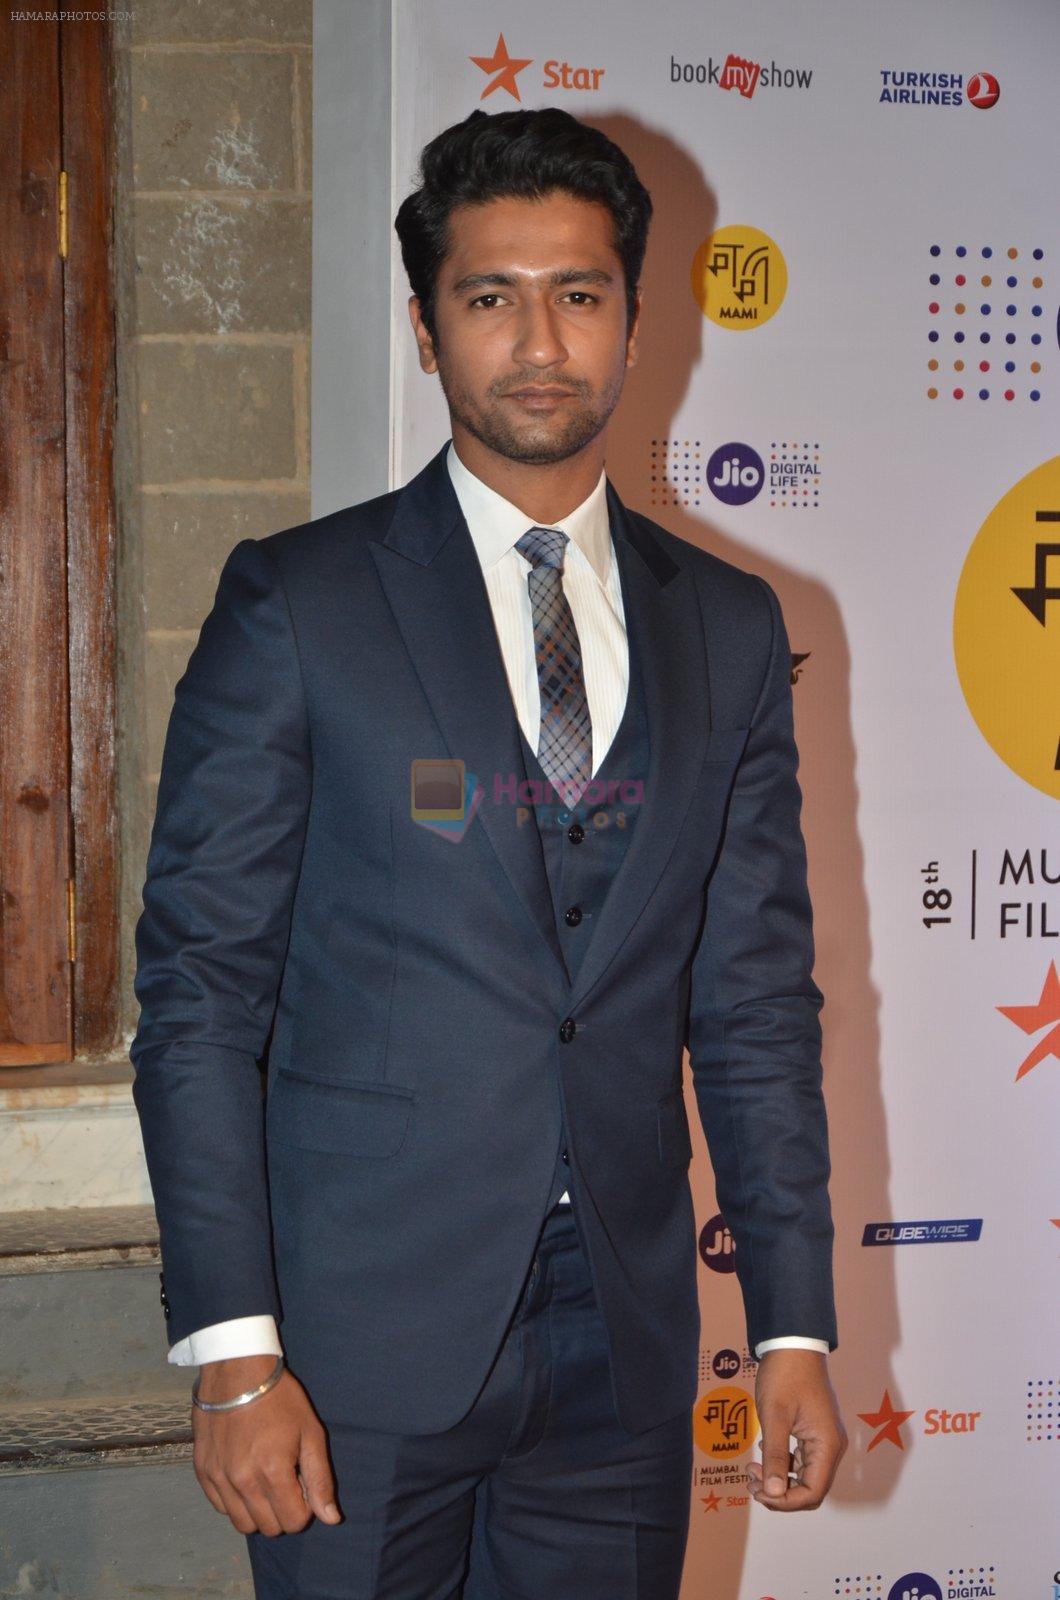 Vicky Kaushal at MAMI Film Festival 2016 on 20th Oct 2016